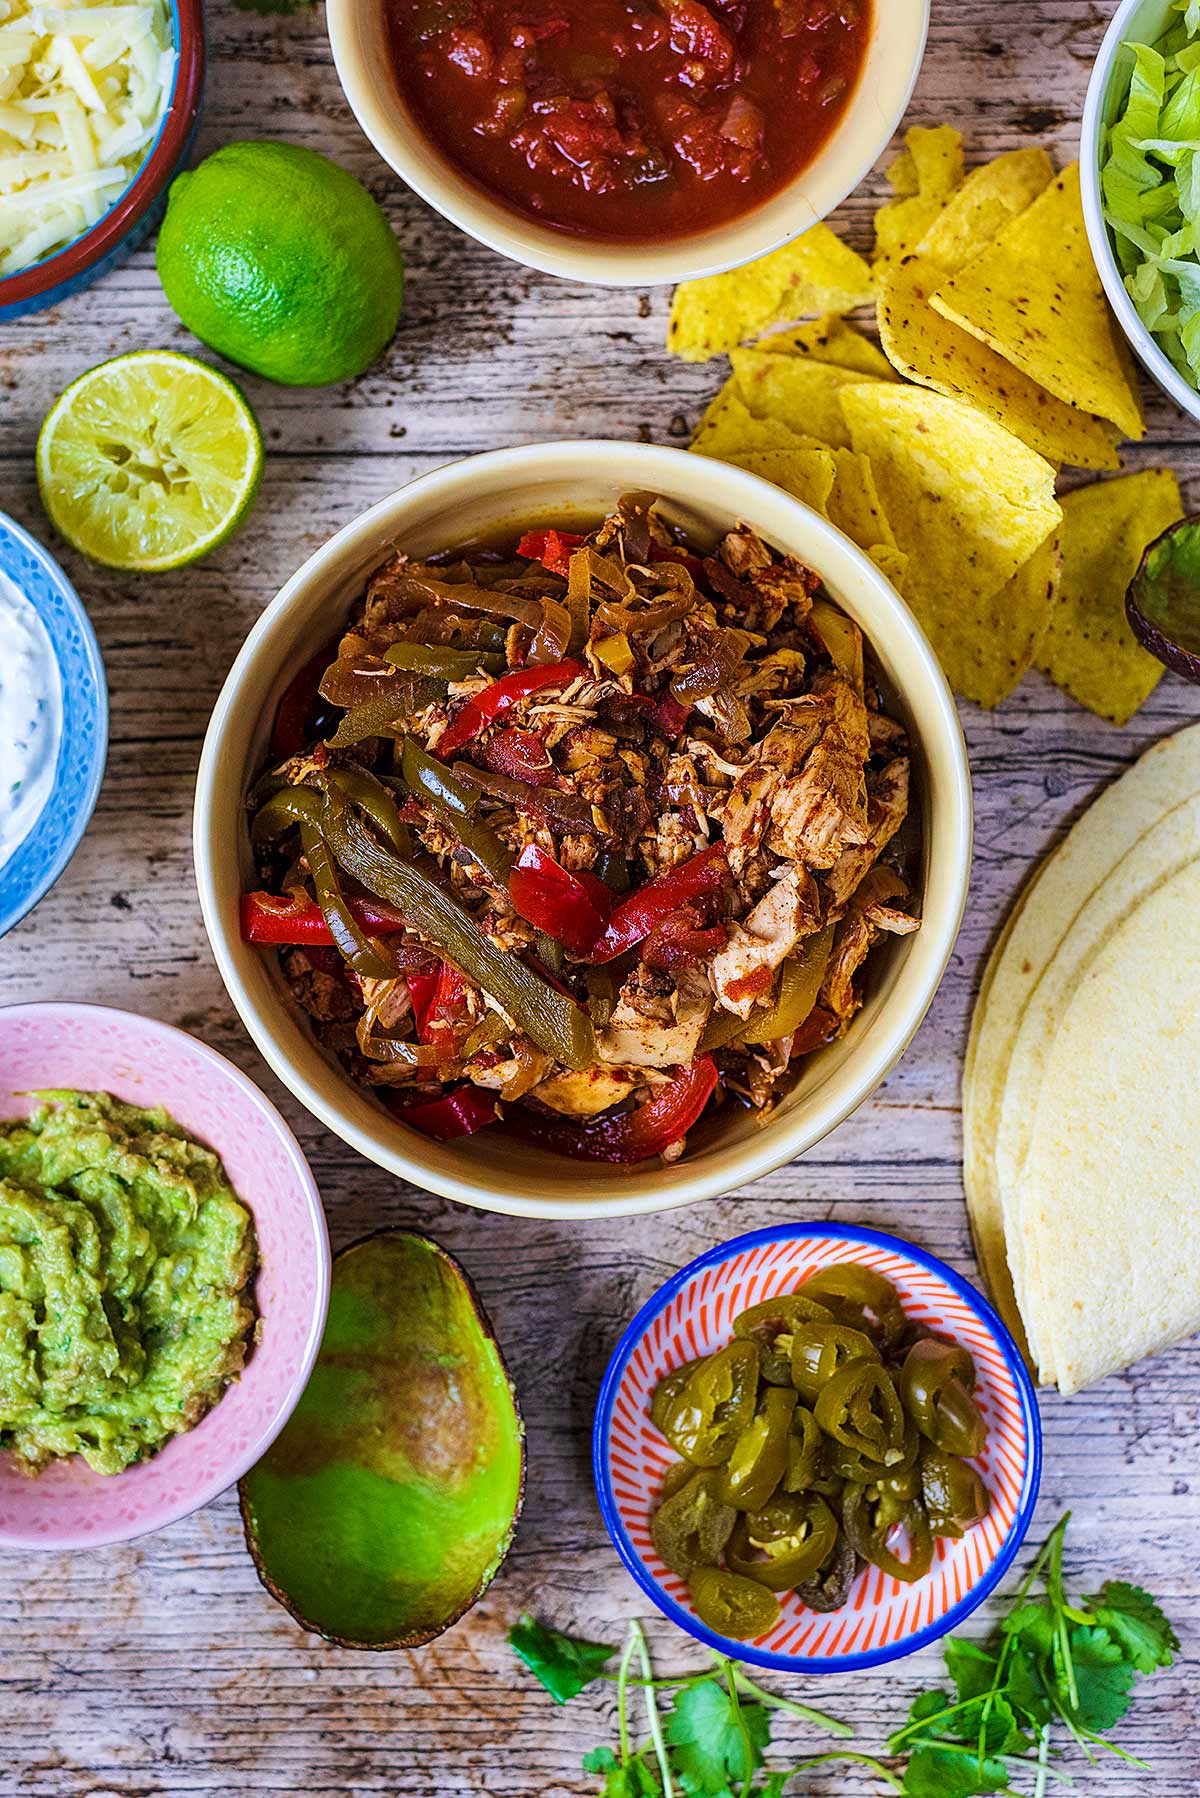 A bowl of fajita filling surrounded by salsa, guacamole, tortilla wraps, jalapenos and tortilla chips